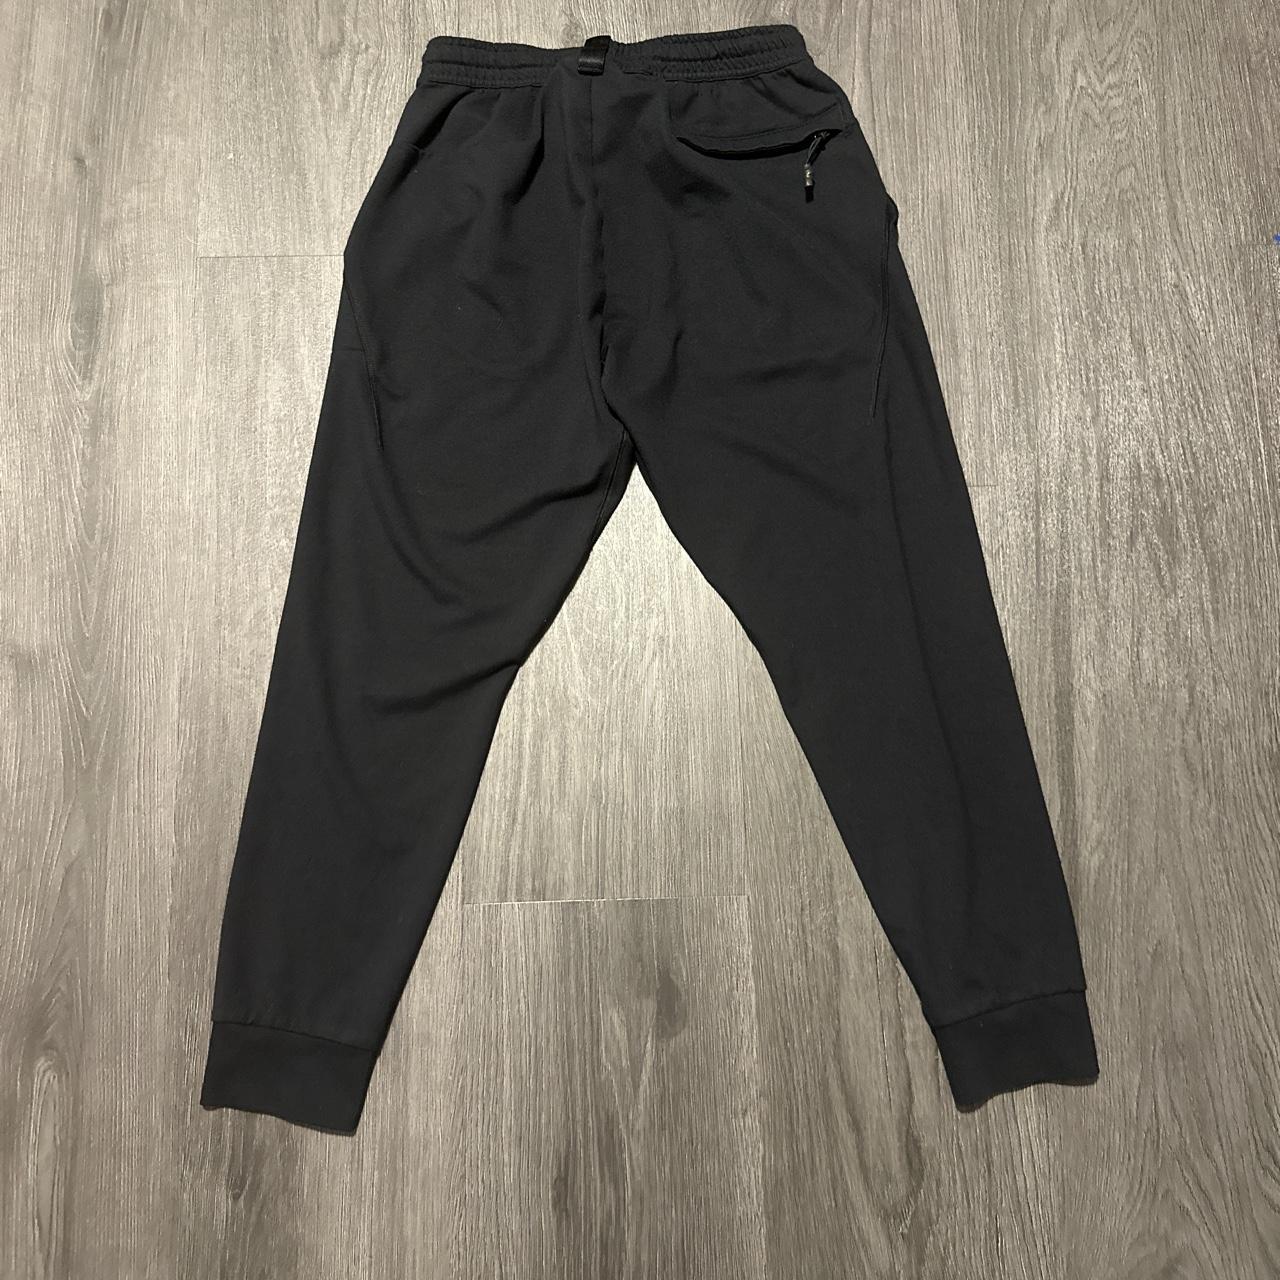 Nike sweats in great condition Size small and fits... - Depop